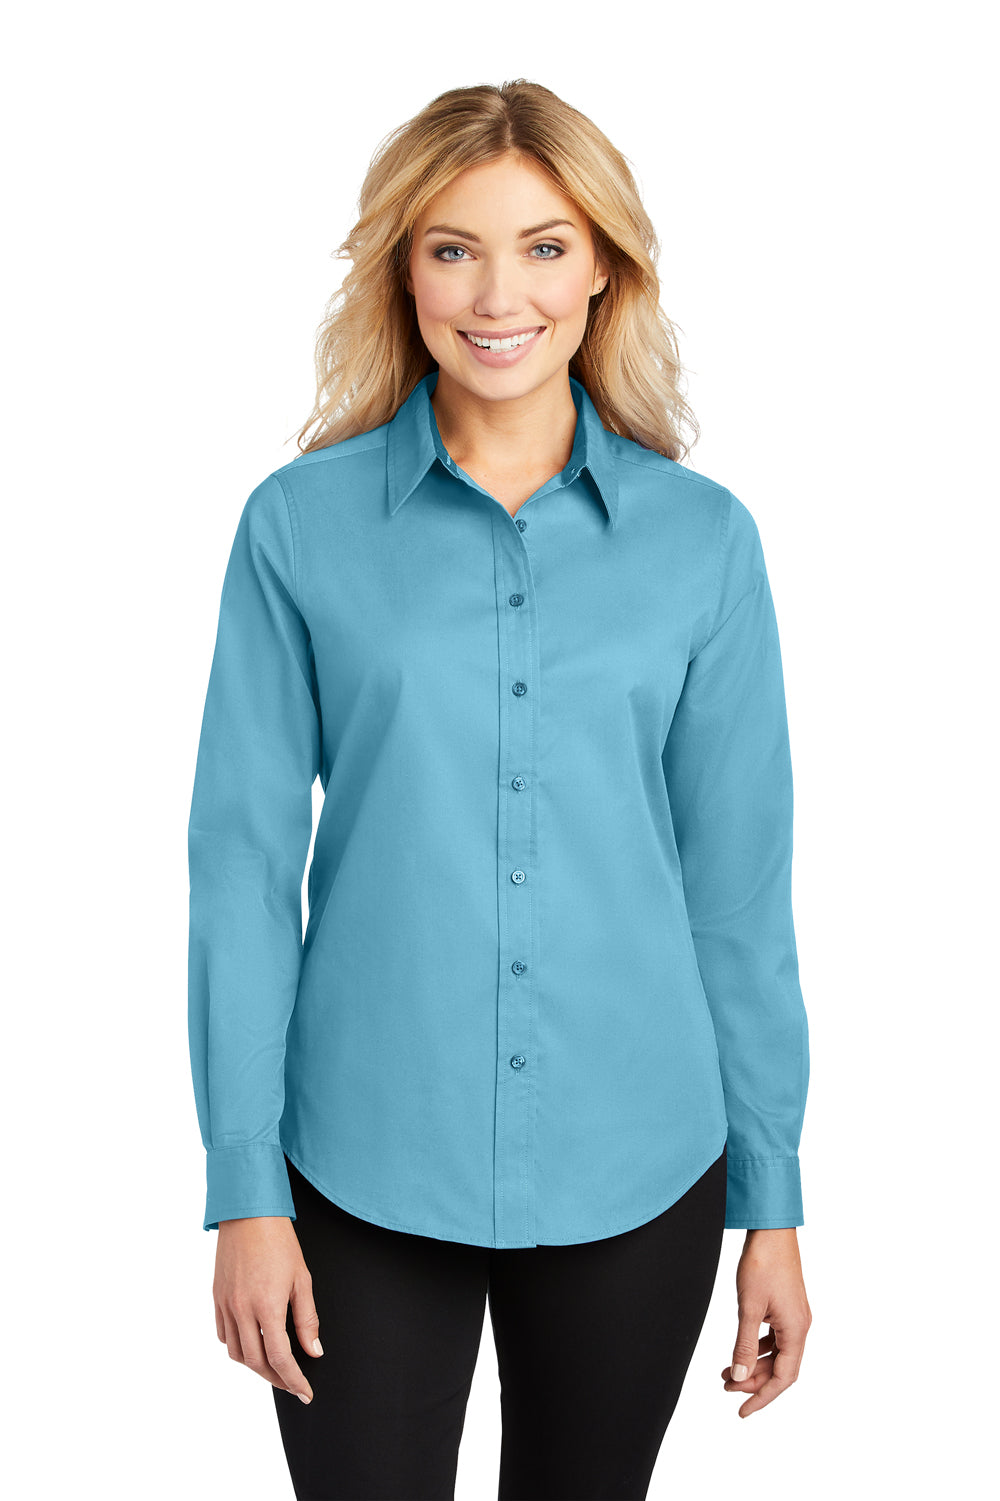 Port Authority L608 Womens Easy Care Wrinkle Resistant Long Sleeve Button Down Shirt Maui Blue Front